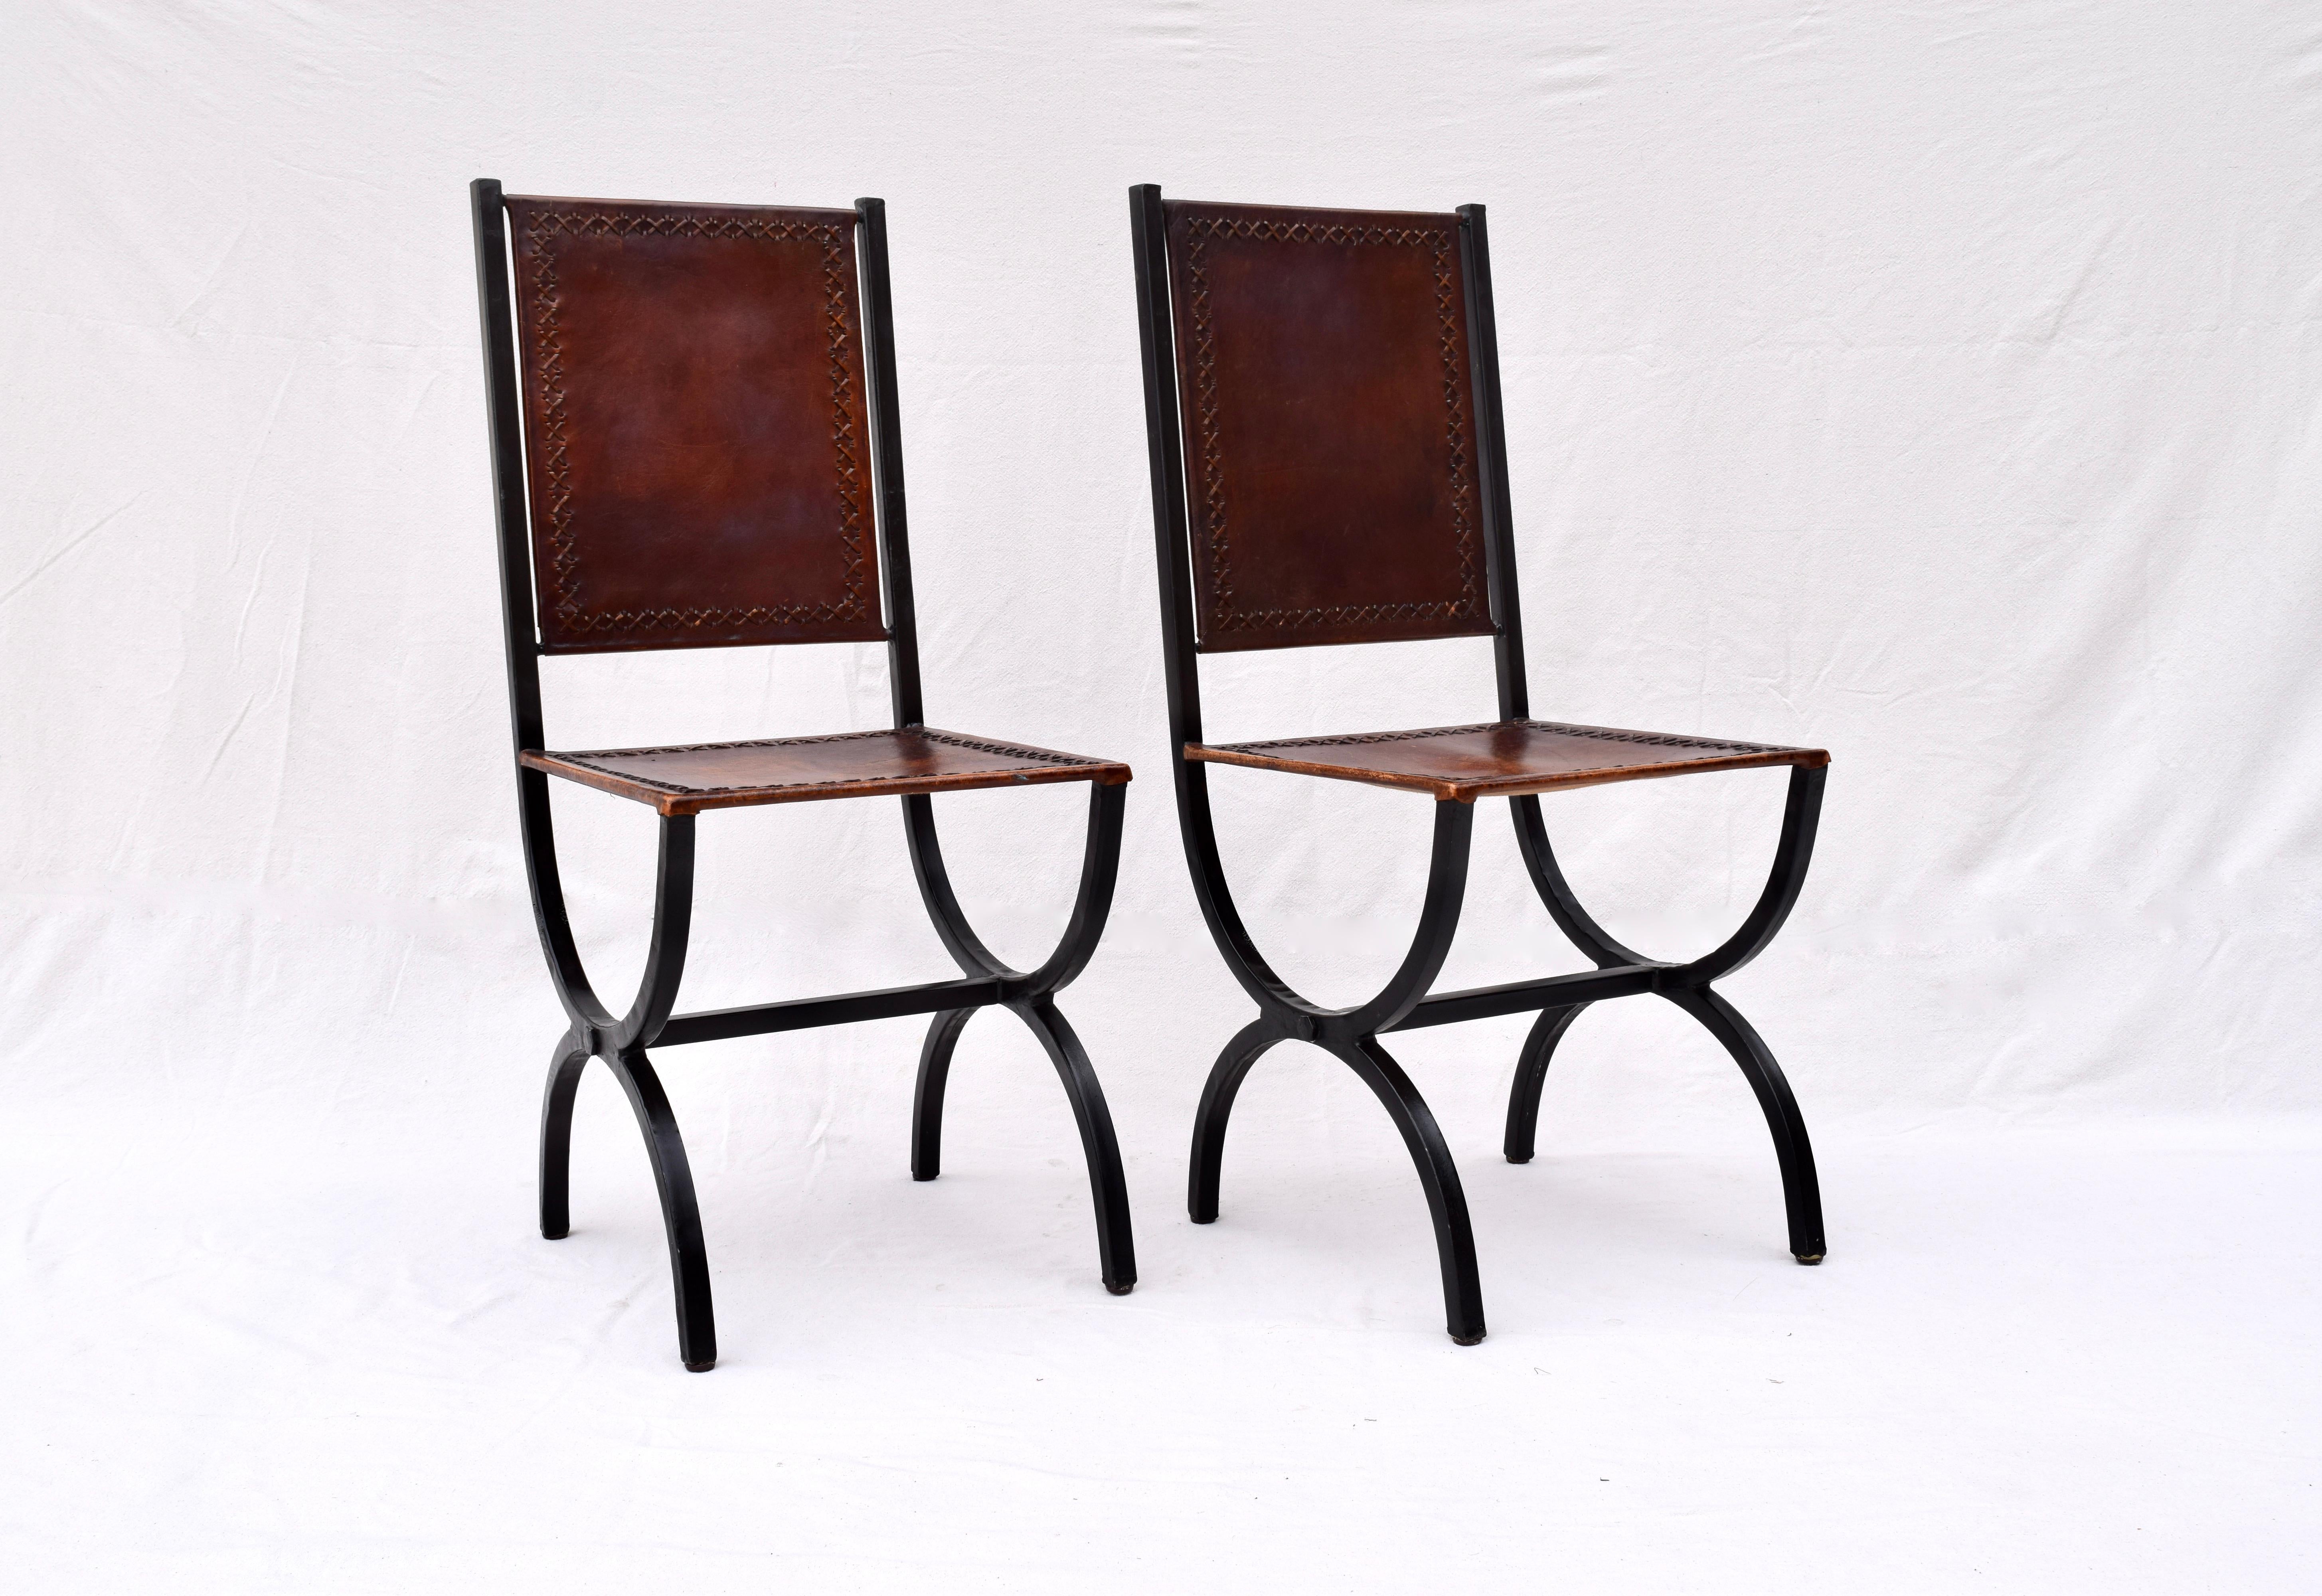 Contemporary California NapaStyle Iron and Leather Curule Form Dining Chairs